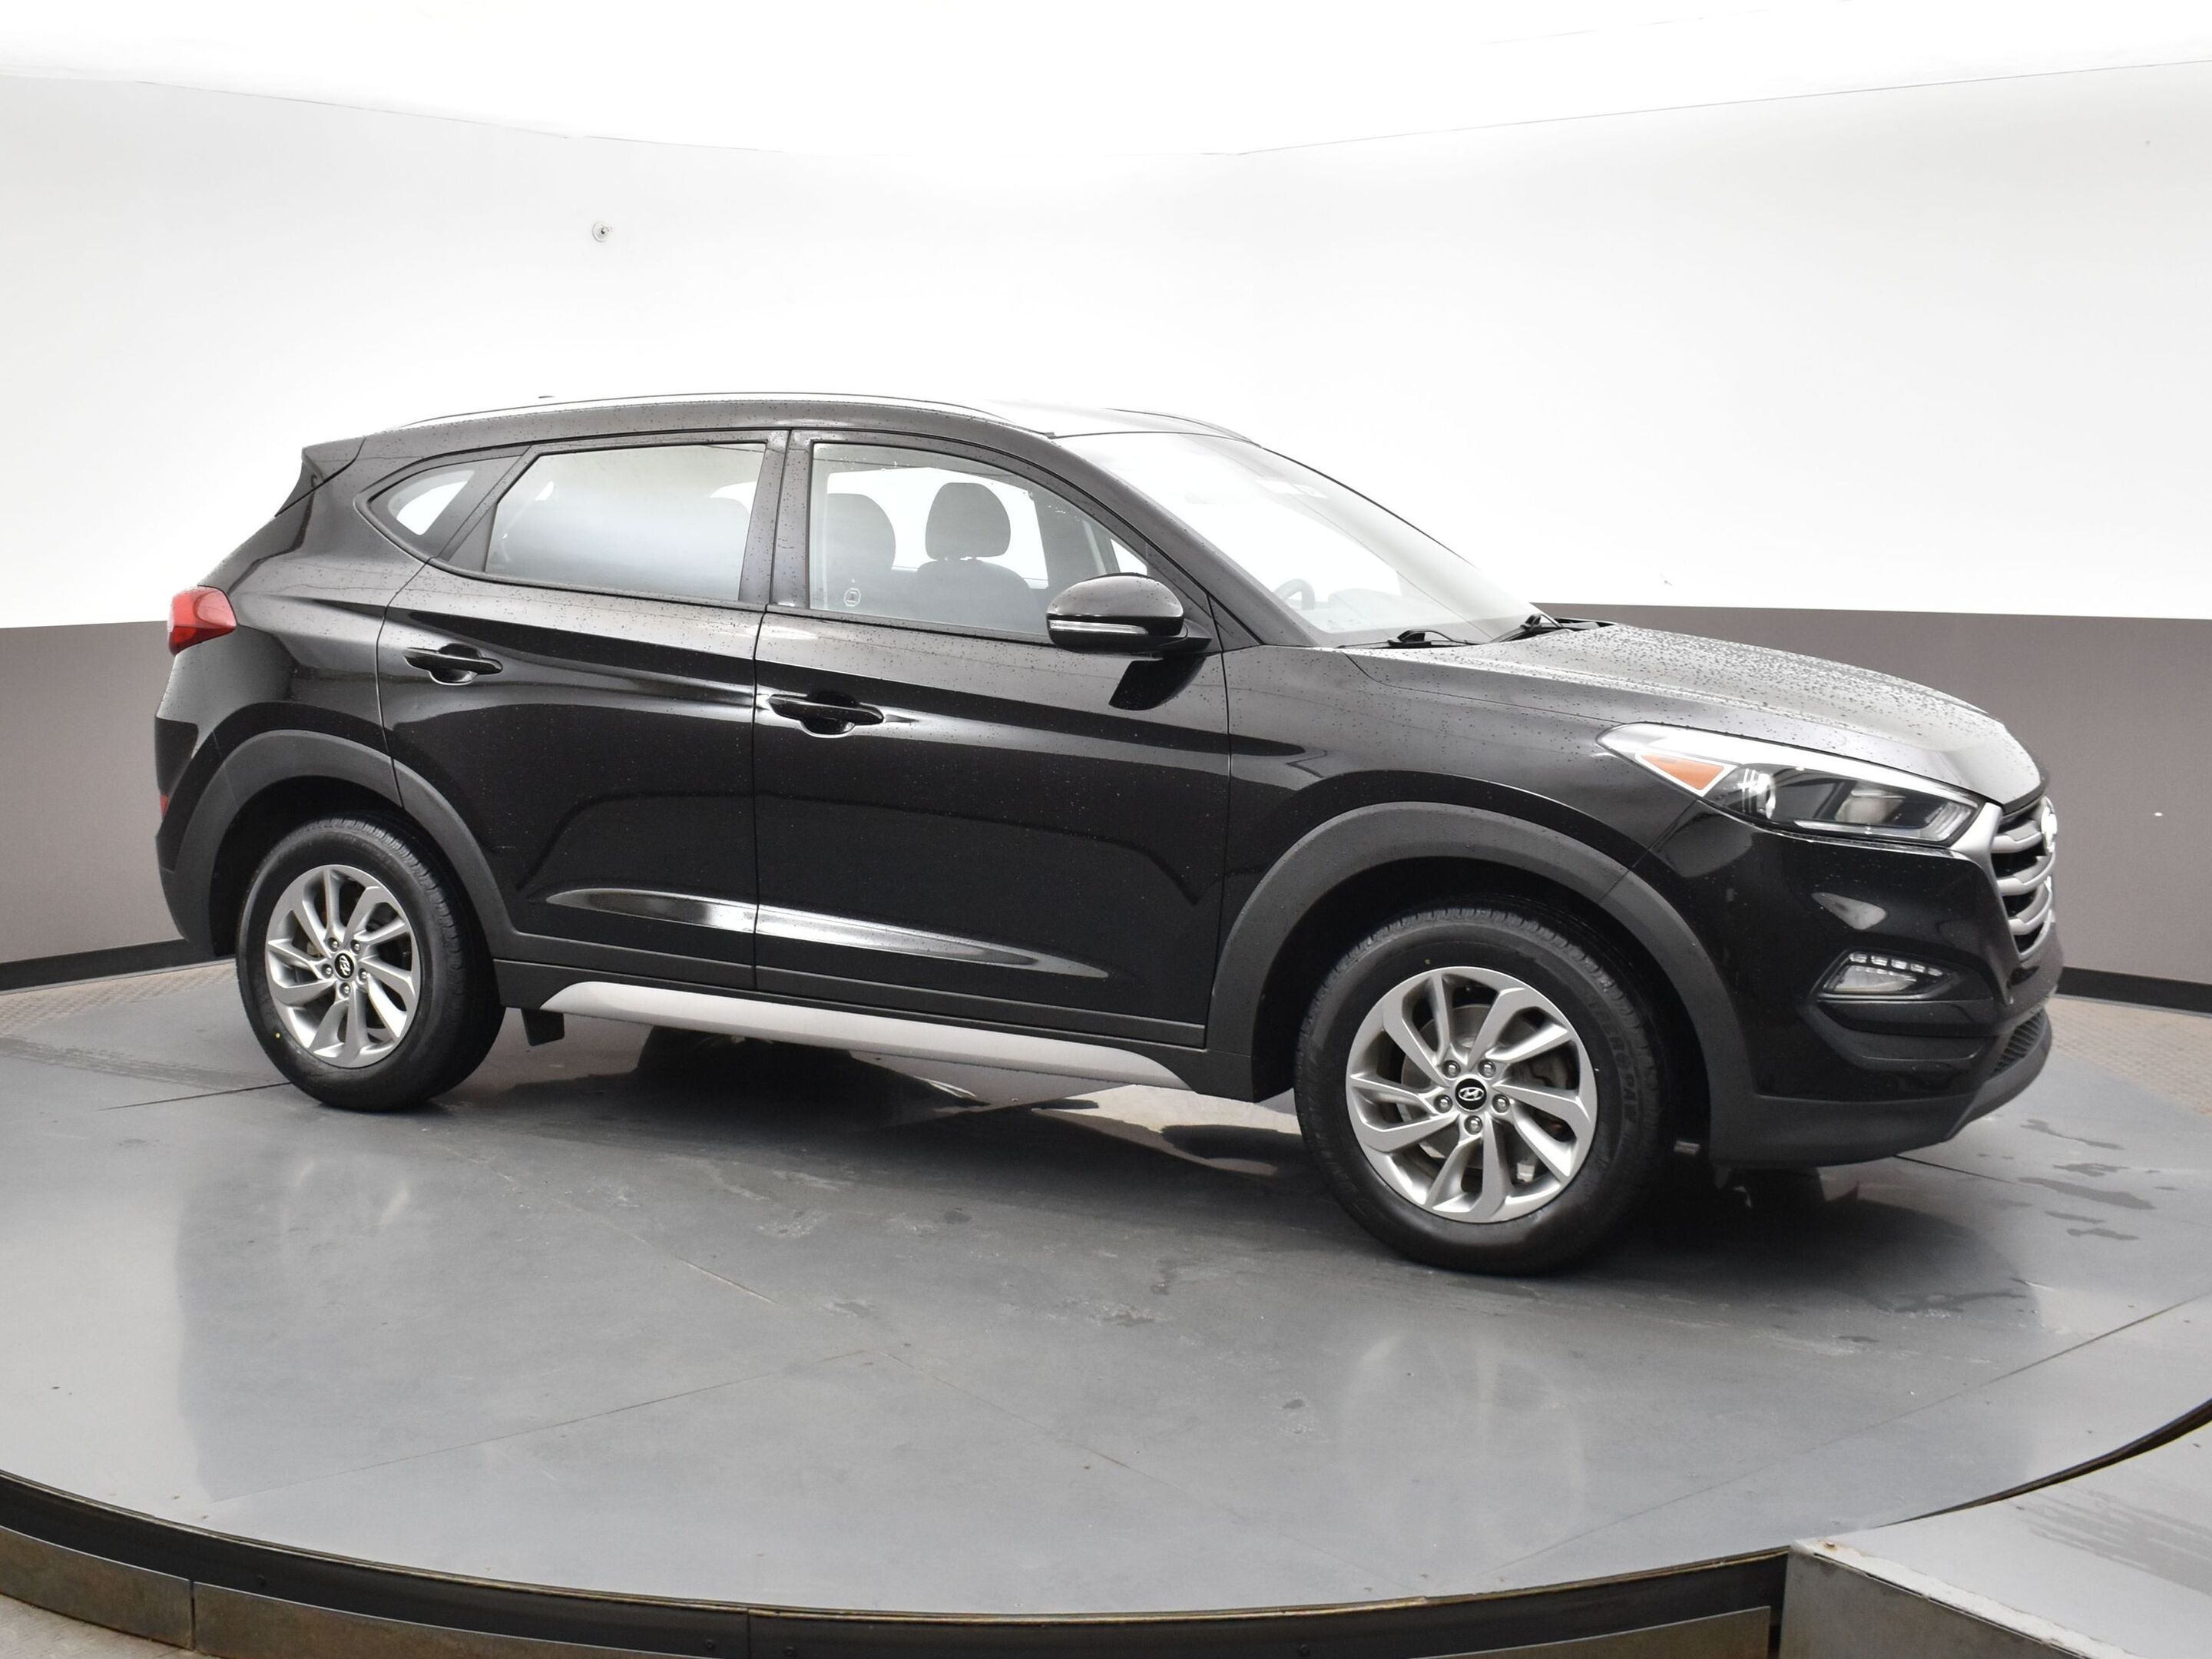 2018 Hyundai Tucson One Owner & Fully Certified ******Remaining Factor